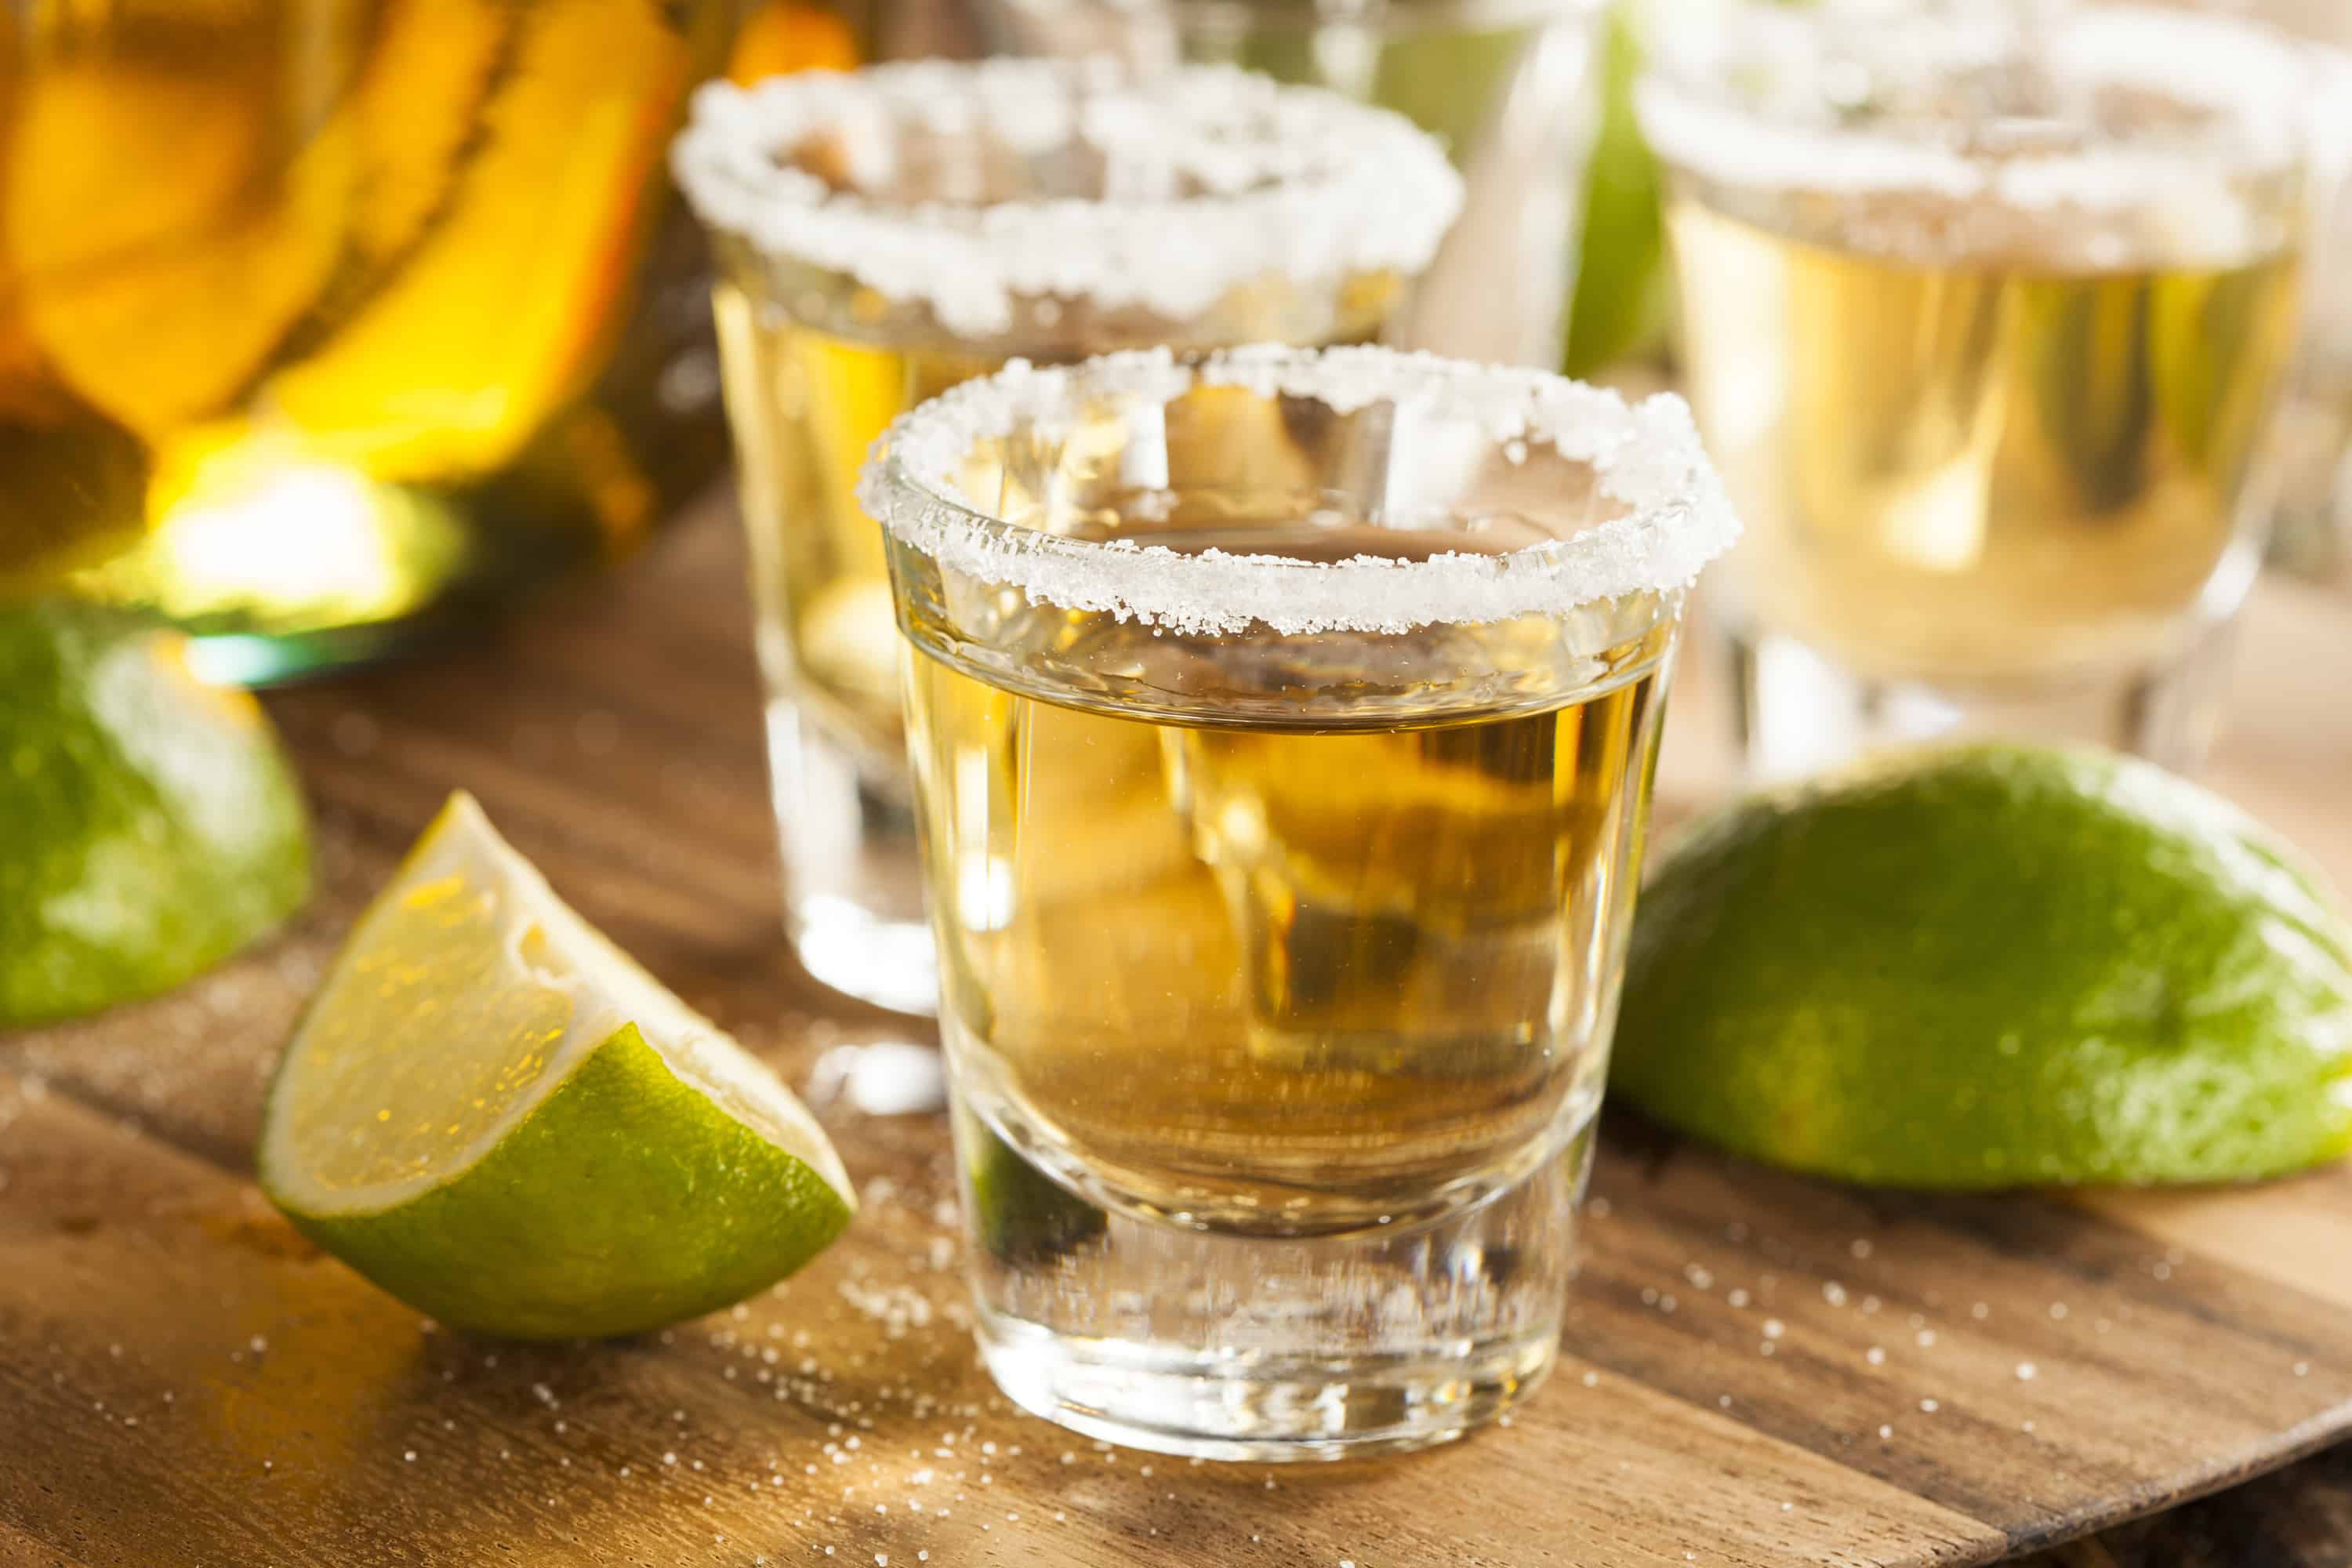 Reasons you should drink a shot of tequila every day